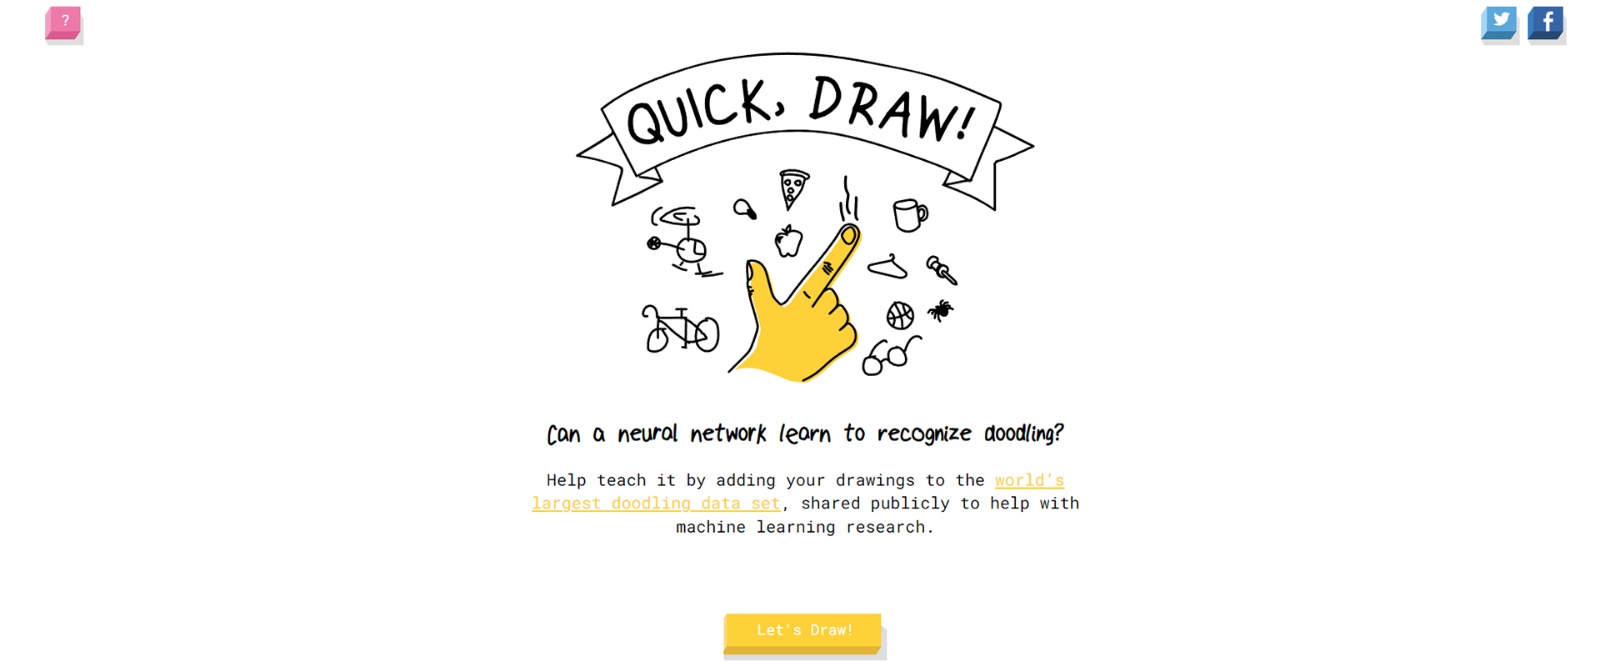 A screenshot of the quickdraw page showing various drawings